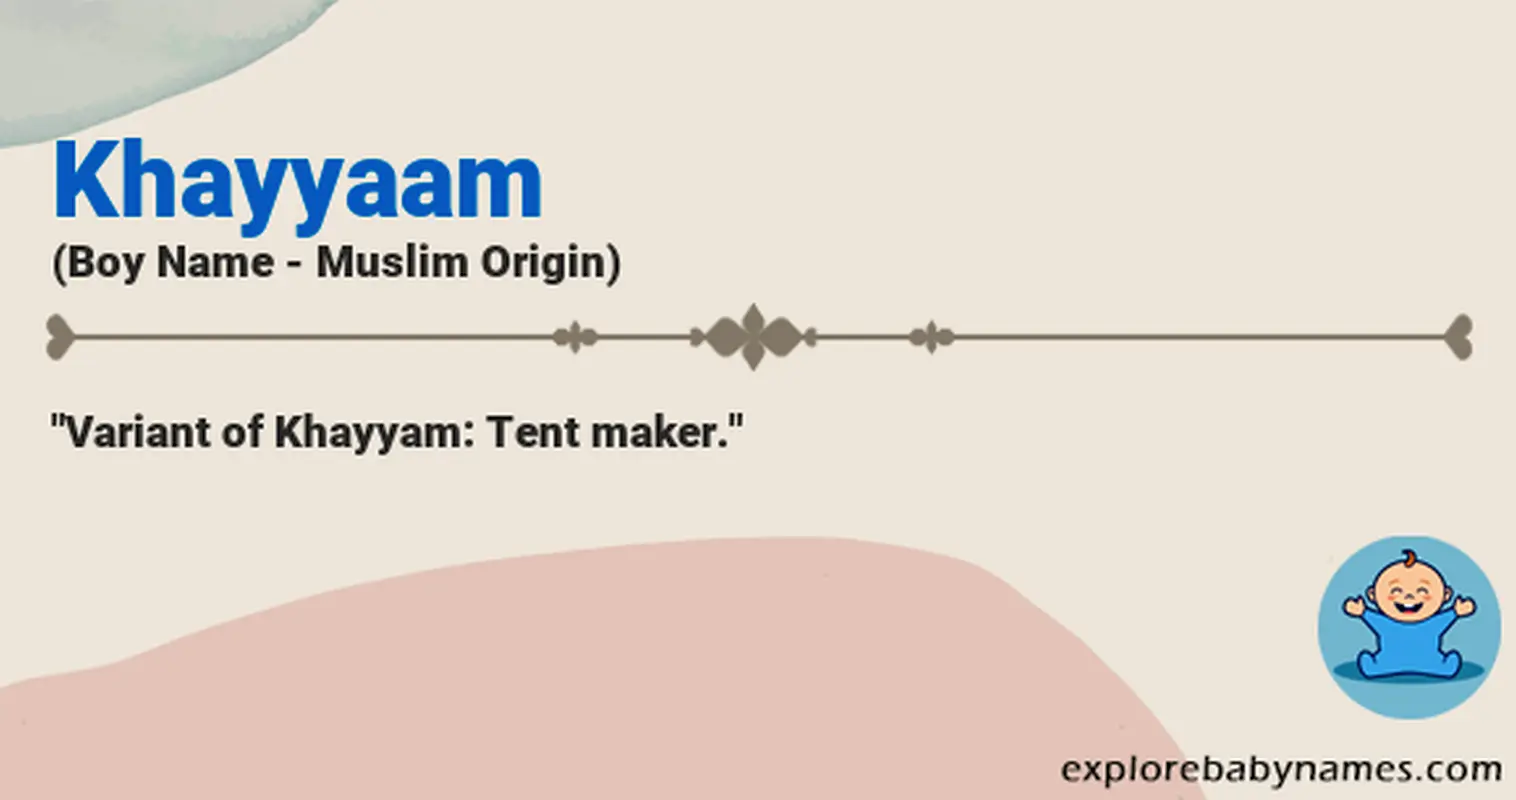 Meaning of Khayyaam